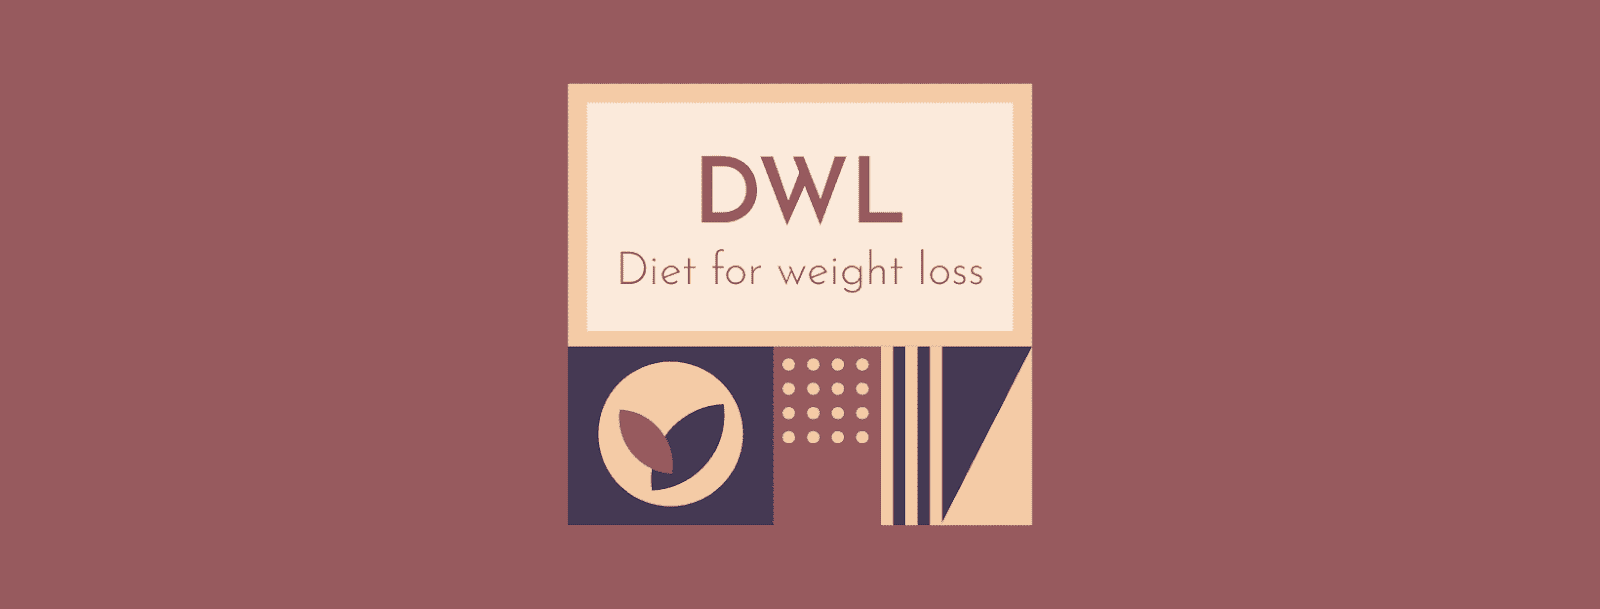 Diet for weight loss